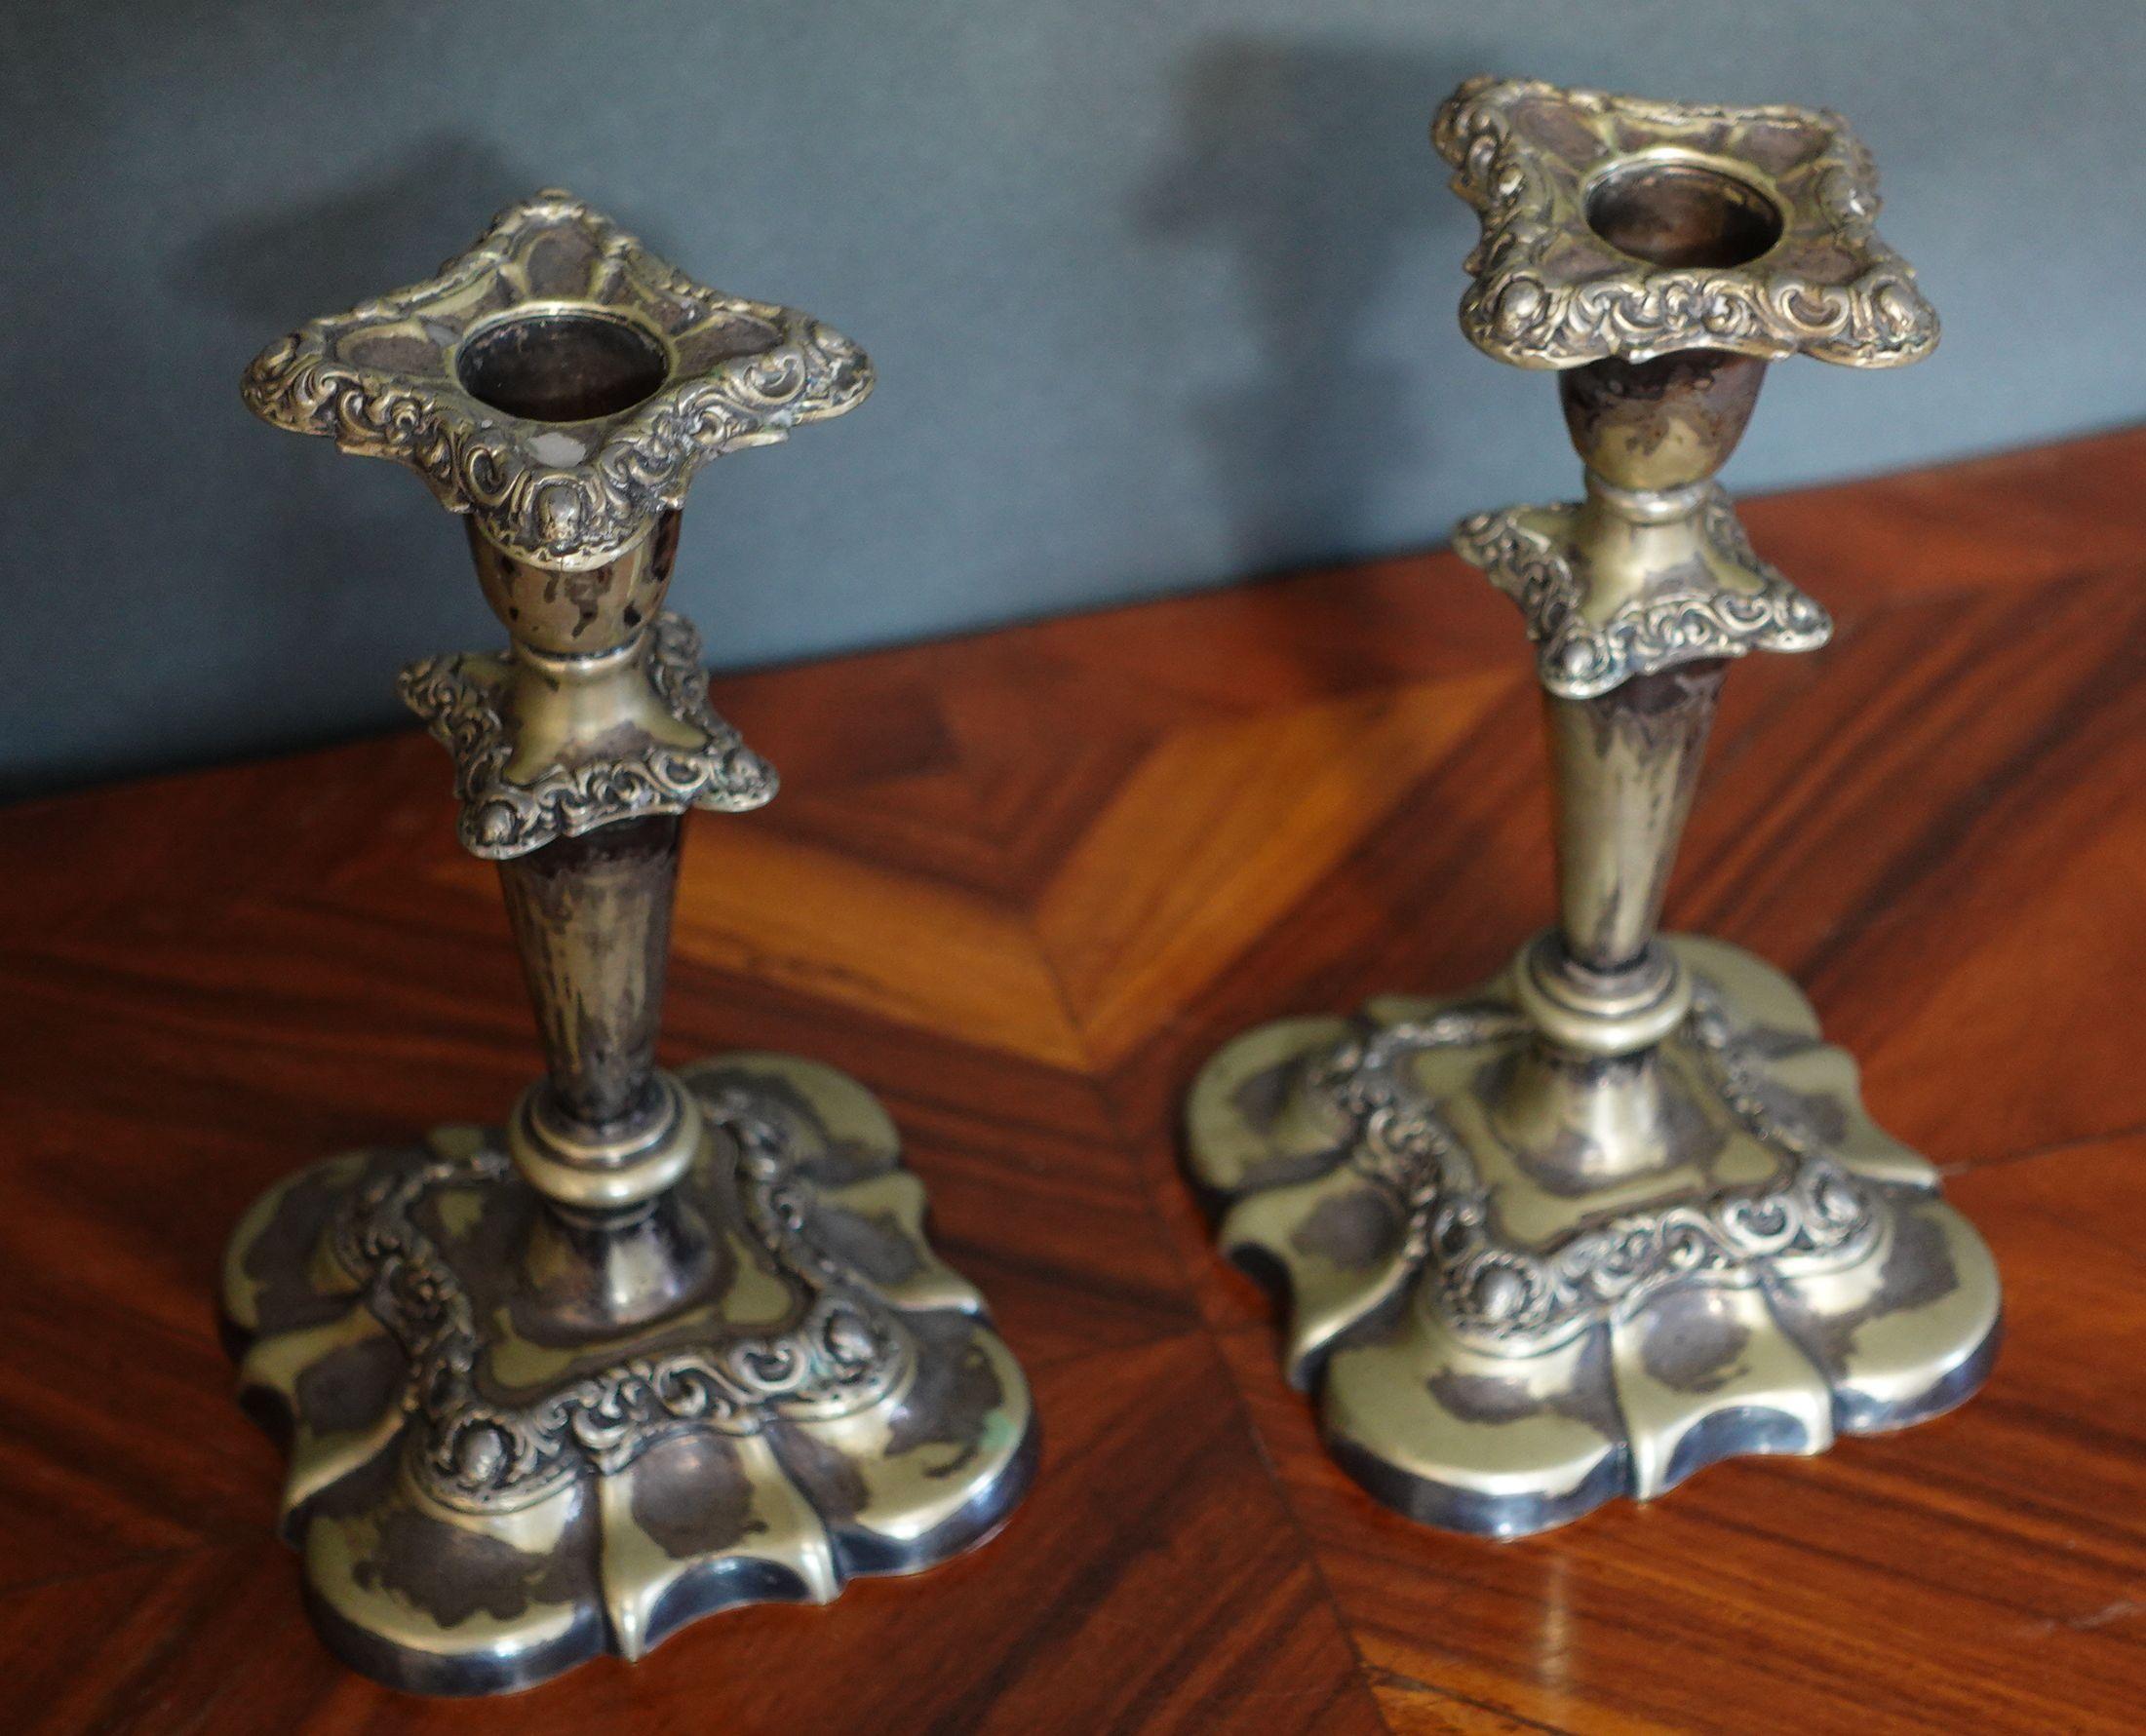 North American Vintage Pair Fancy Gorham Silver Plate Candlesticks with Inserts No. 20702 For Sale